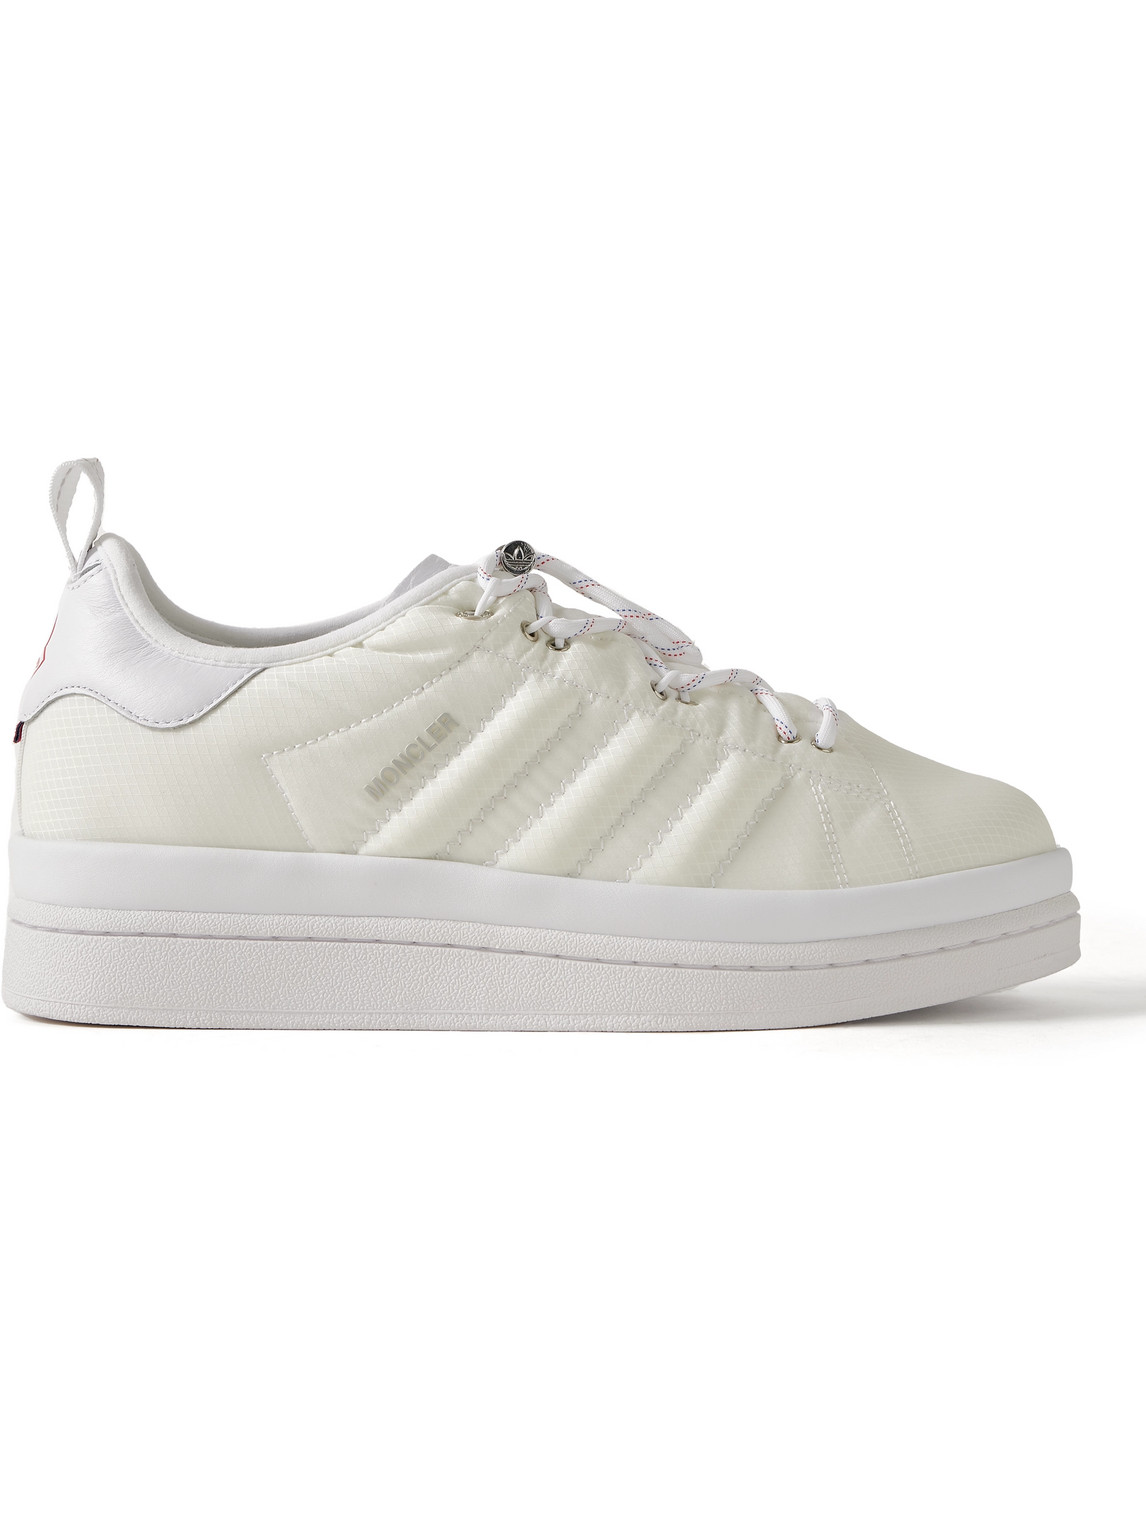 Moncler Genius Adidas Originals Campus Leather-trimmed Quilted Gore-tex™ Sneakers In White